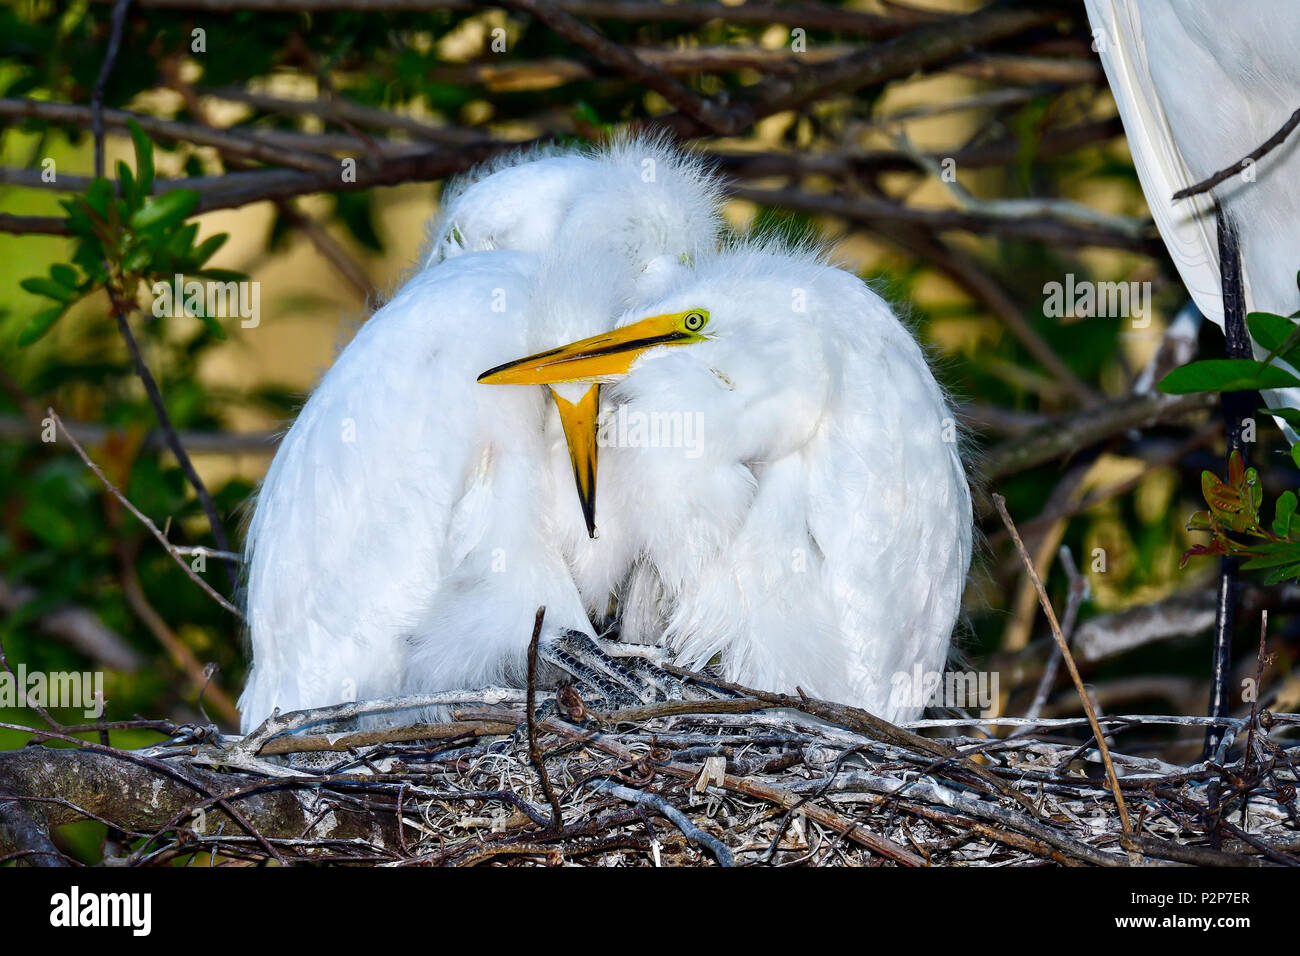 Great egret chicks are warming up each other on the chilly morning. Stock Photo